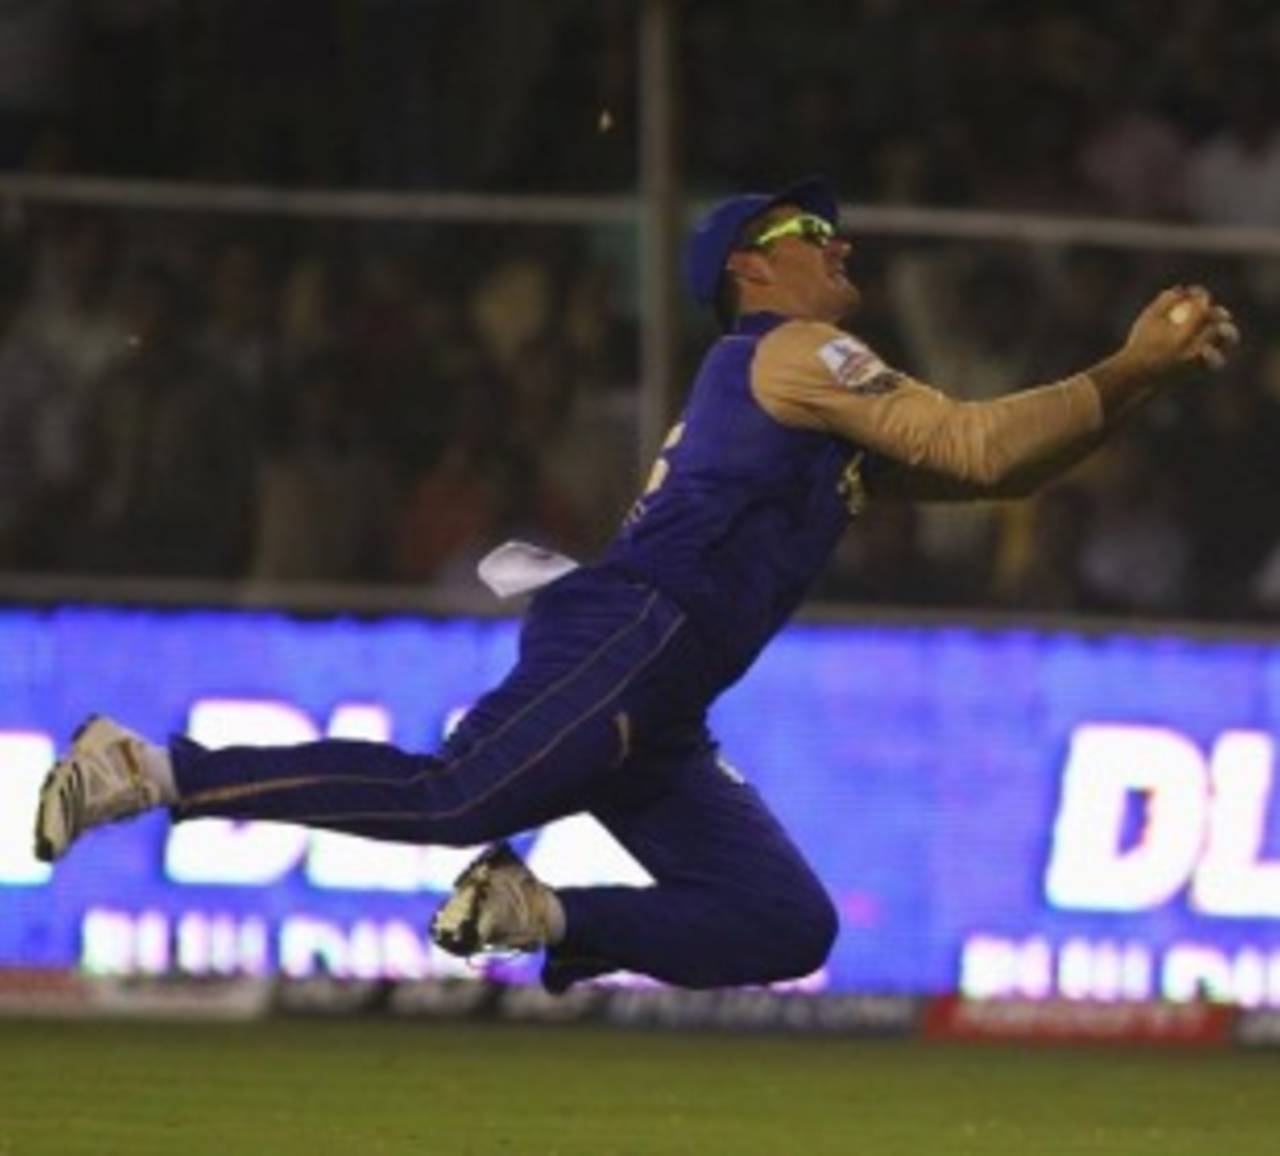 Graeme Smith sustained his latest injury moments after taking this catch in the IPL&nbsp;&nbsp;&bull;&nbsp;&nbsp;Indian Premier League